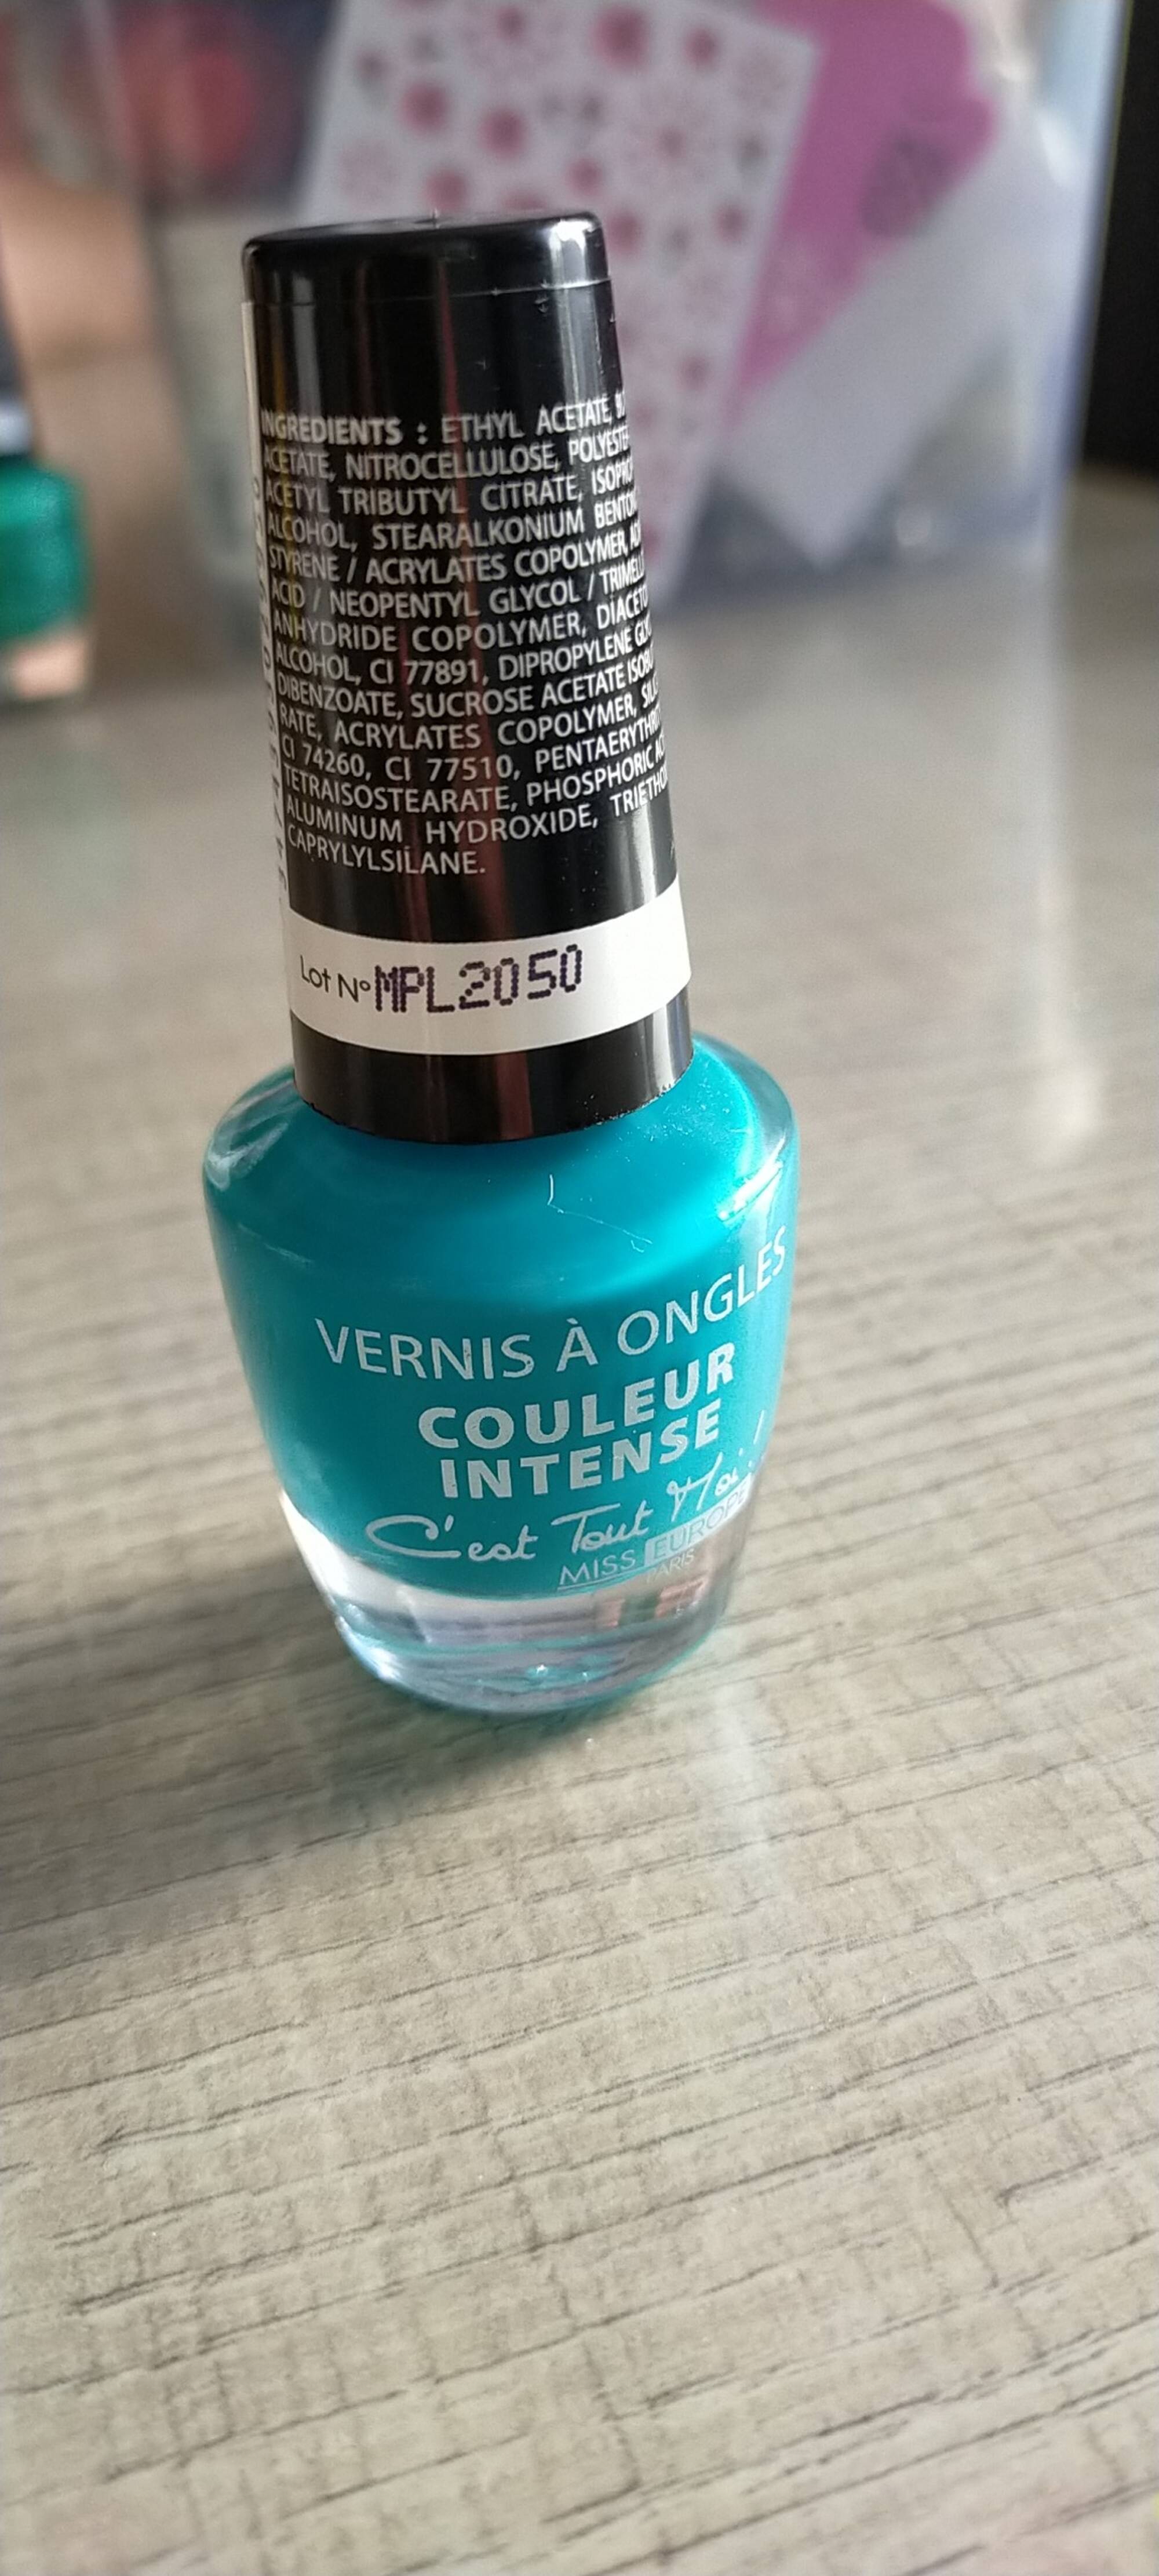 MISS EUROPE - Vernis à ongles couleur intense